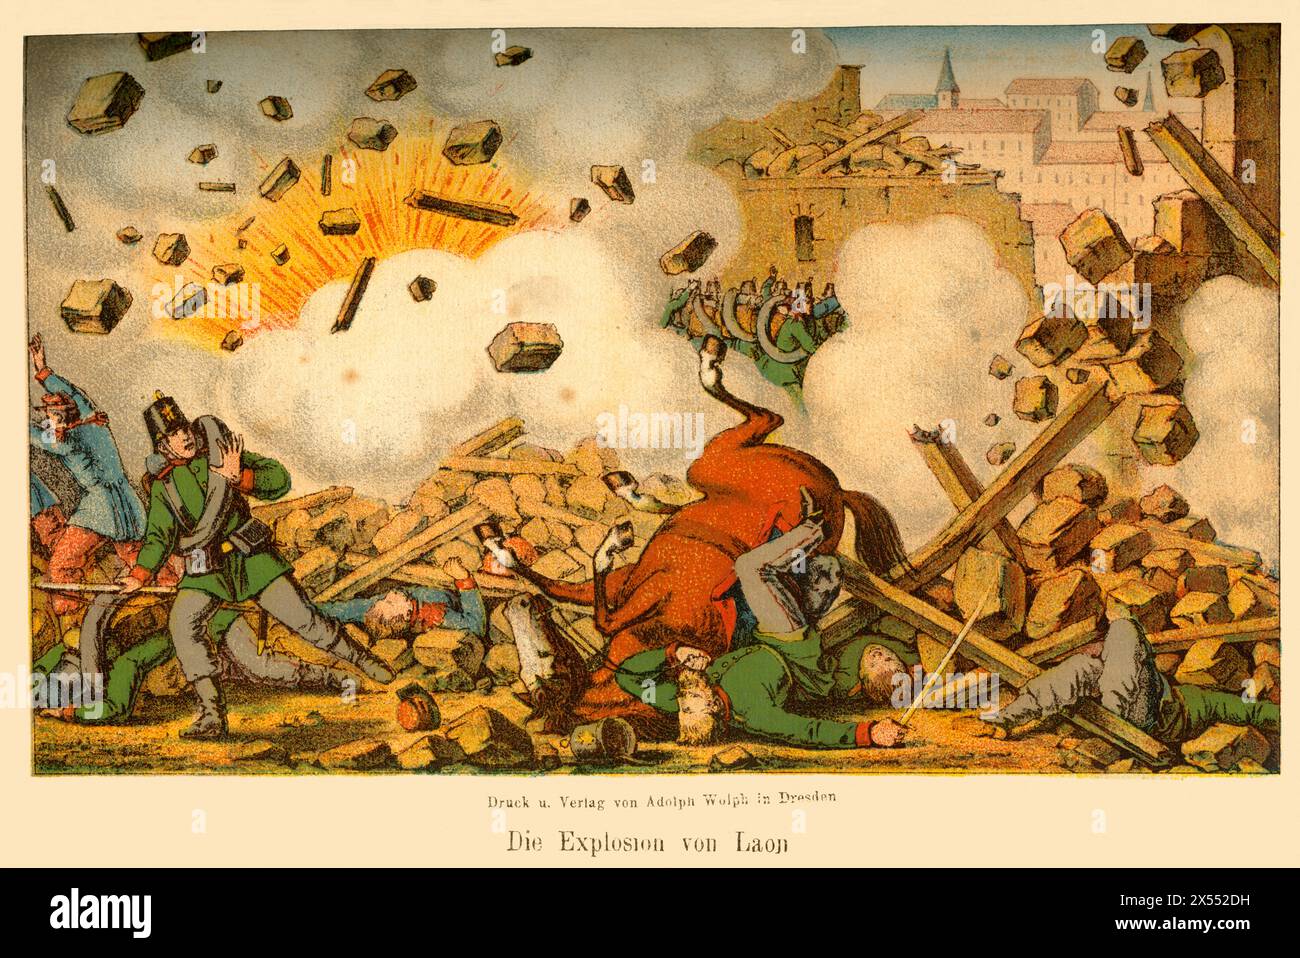 events, Franco-Prussion war, 1870-1871, original text "The explosion of Laon ", ARTIST'S COPYRIGHT HAS NOT TO BE CLEARED Stock Photo